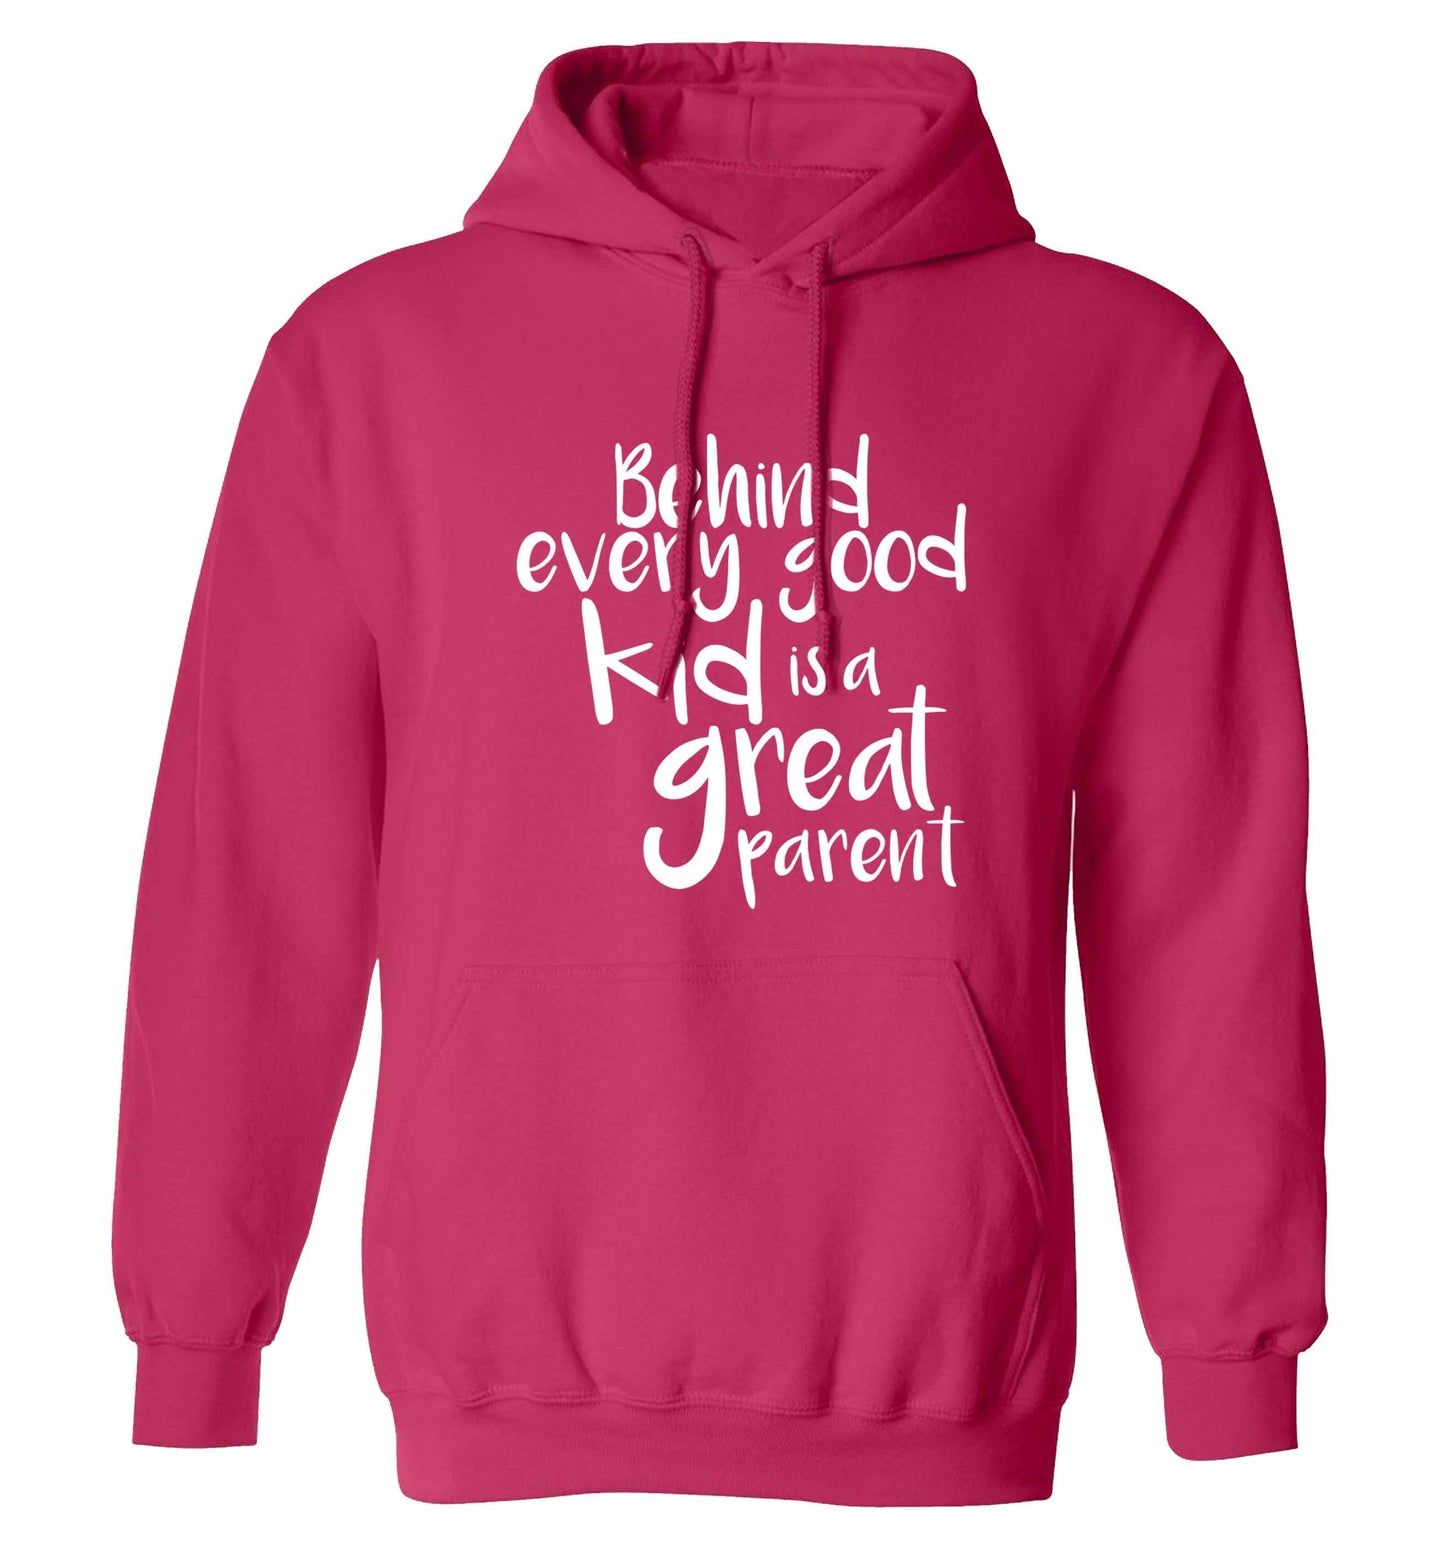 Behind every good kid is a great parent adults unisex pink hoodie 2XL